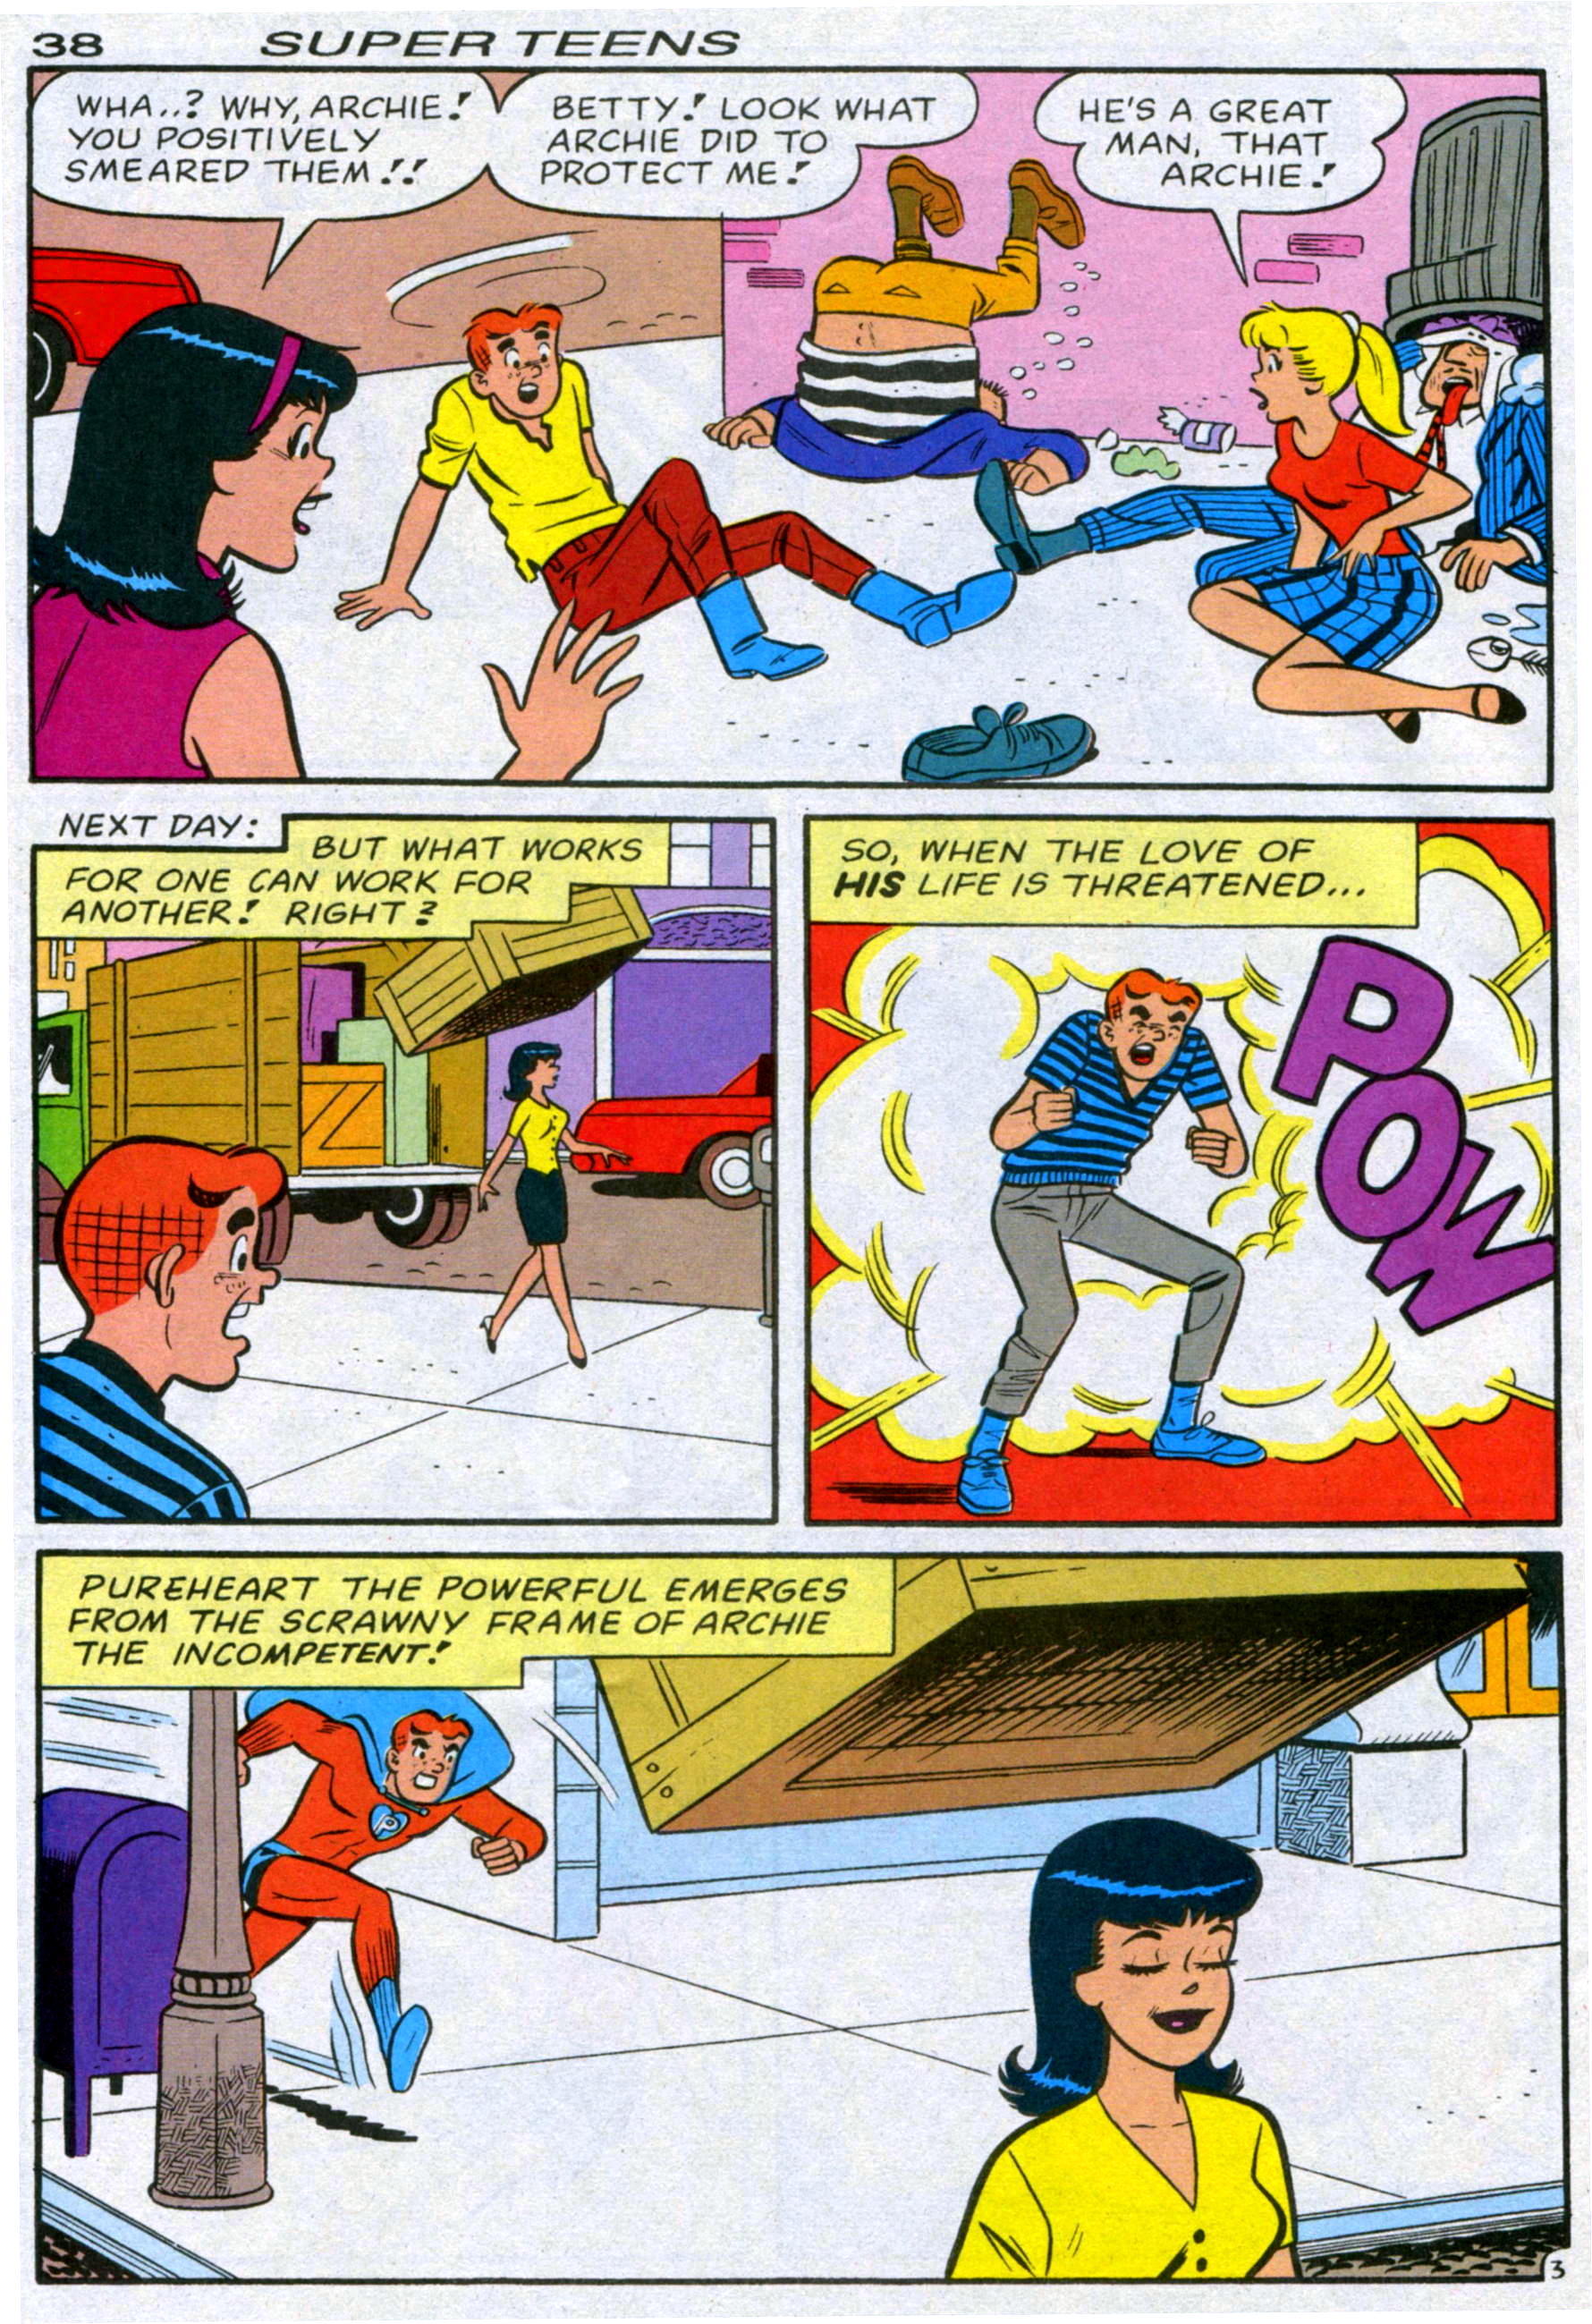 Read online Archie's Super Teens comic -  Issue #1 - 40